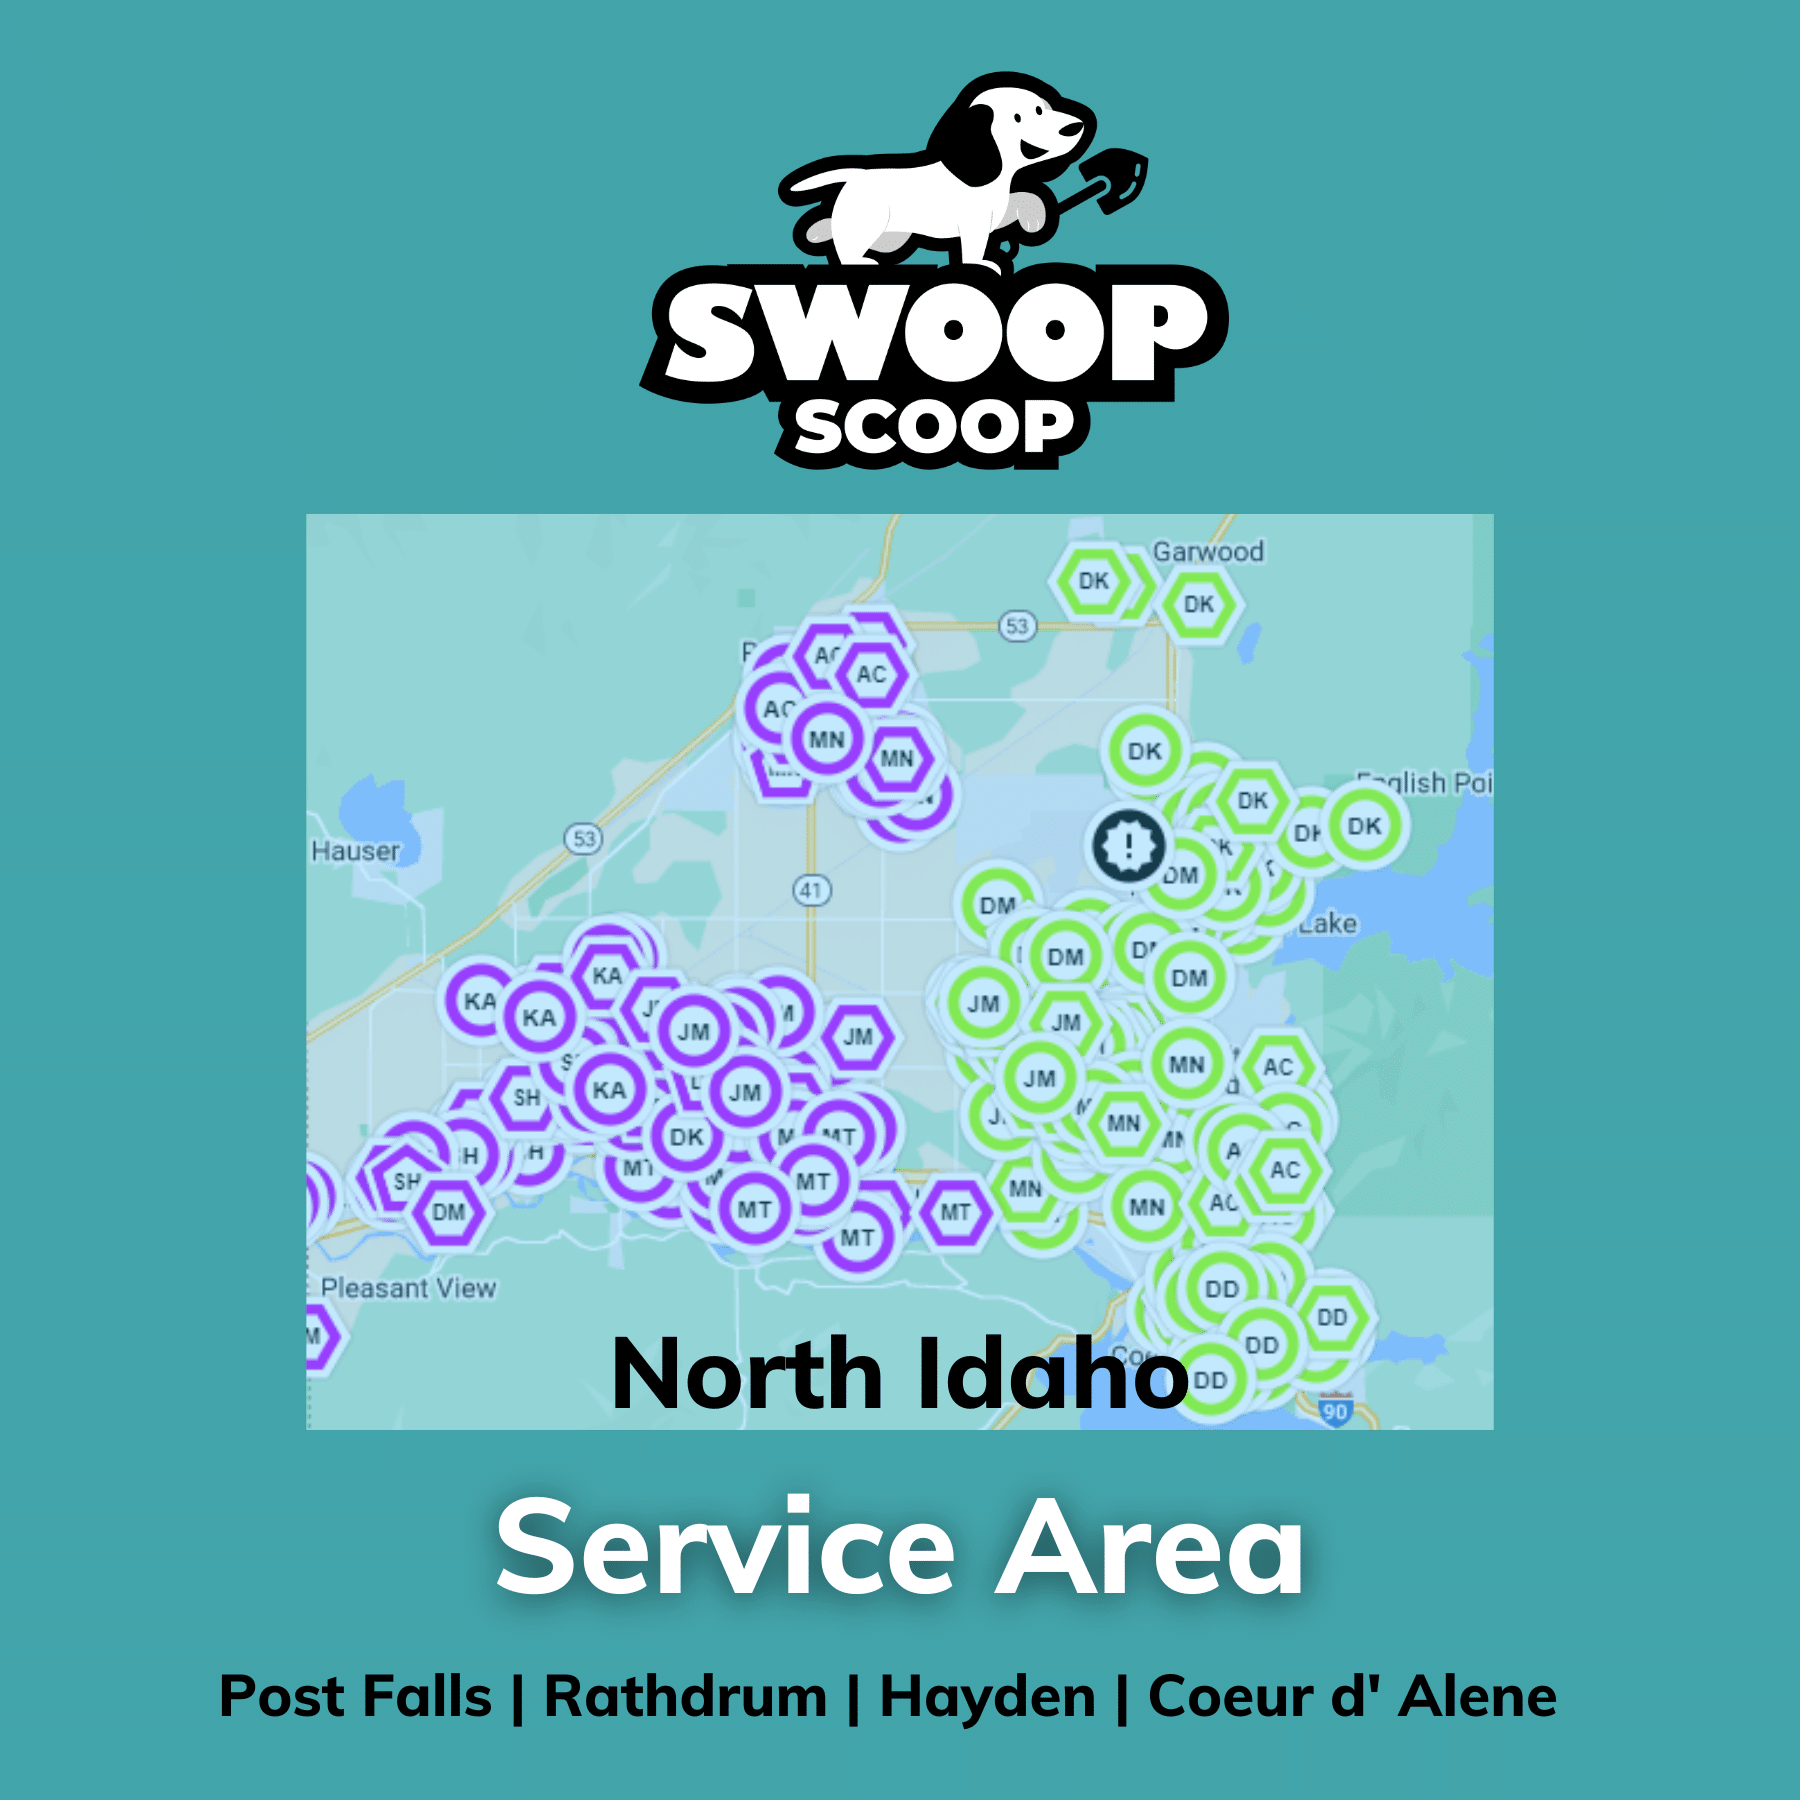 Swoop Scoop dog waste removal service area in North Idaho.